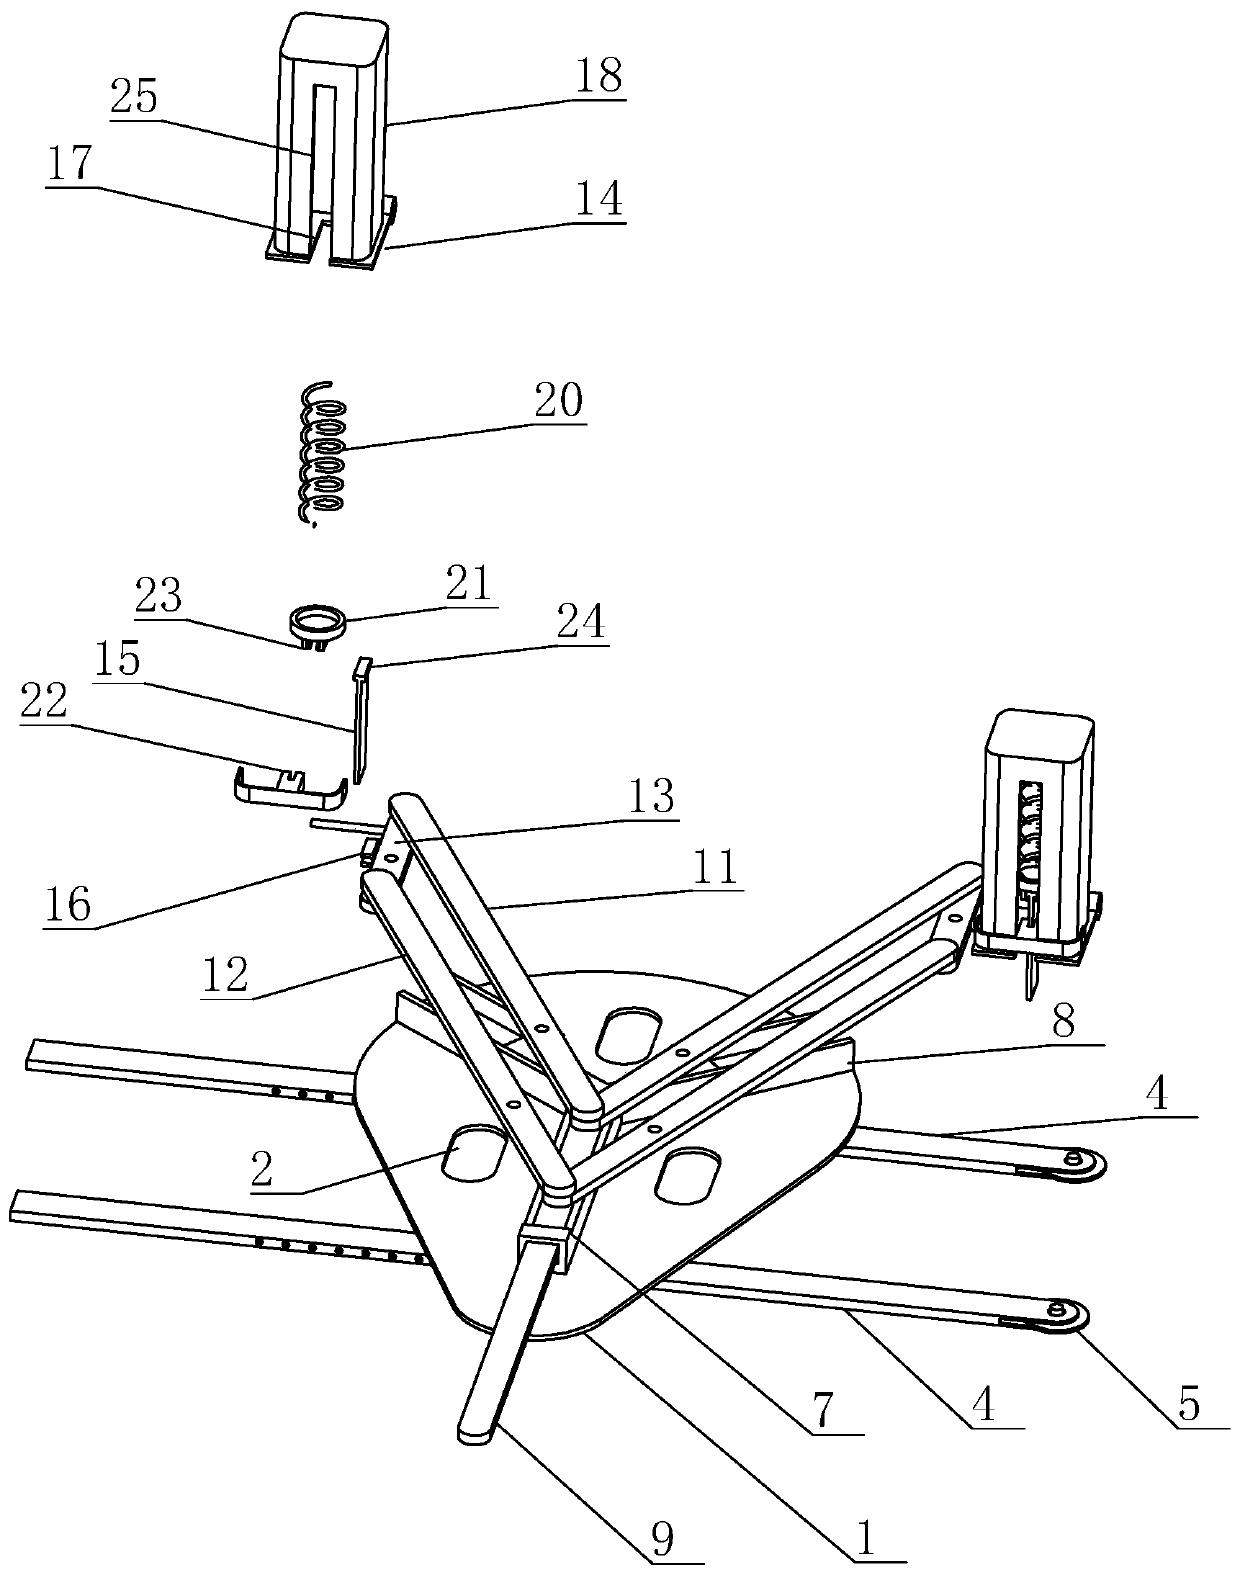 An electrical engineering positioning installation device